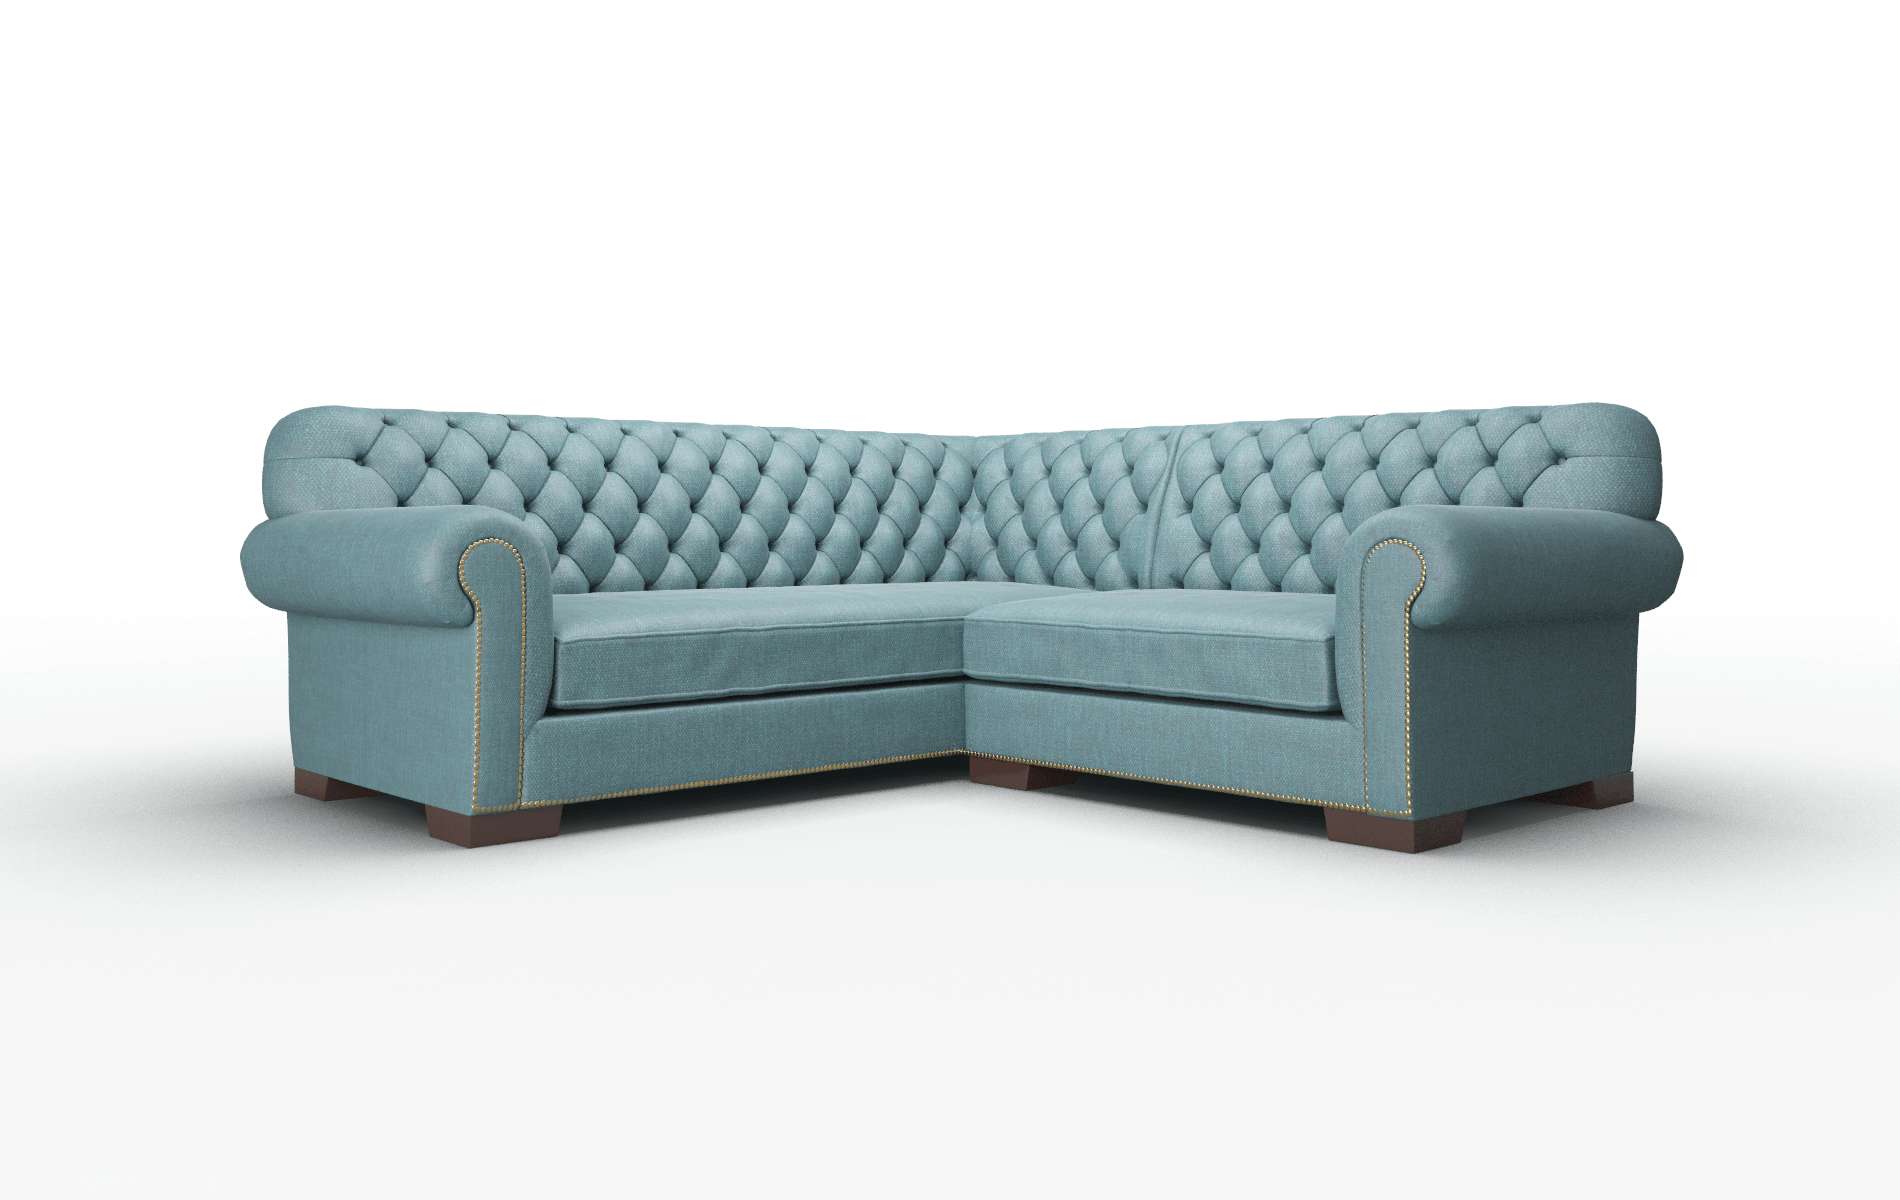 Chester Rocket Peacock Sectional espresso legs 1